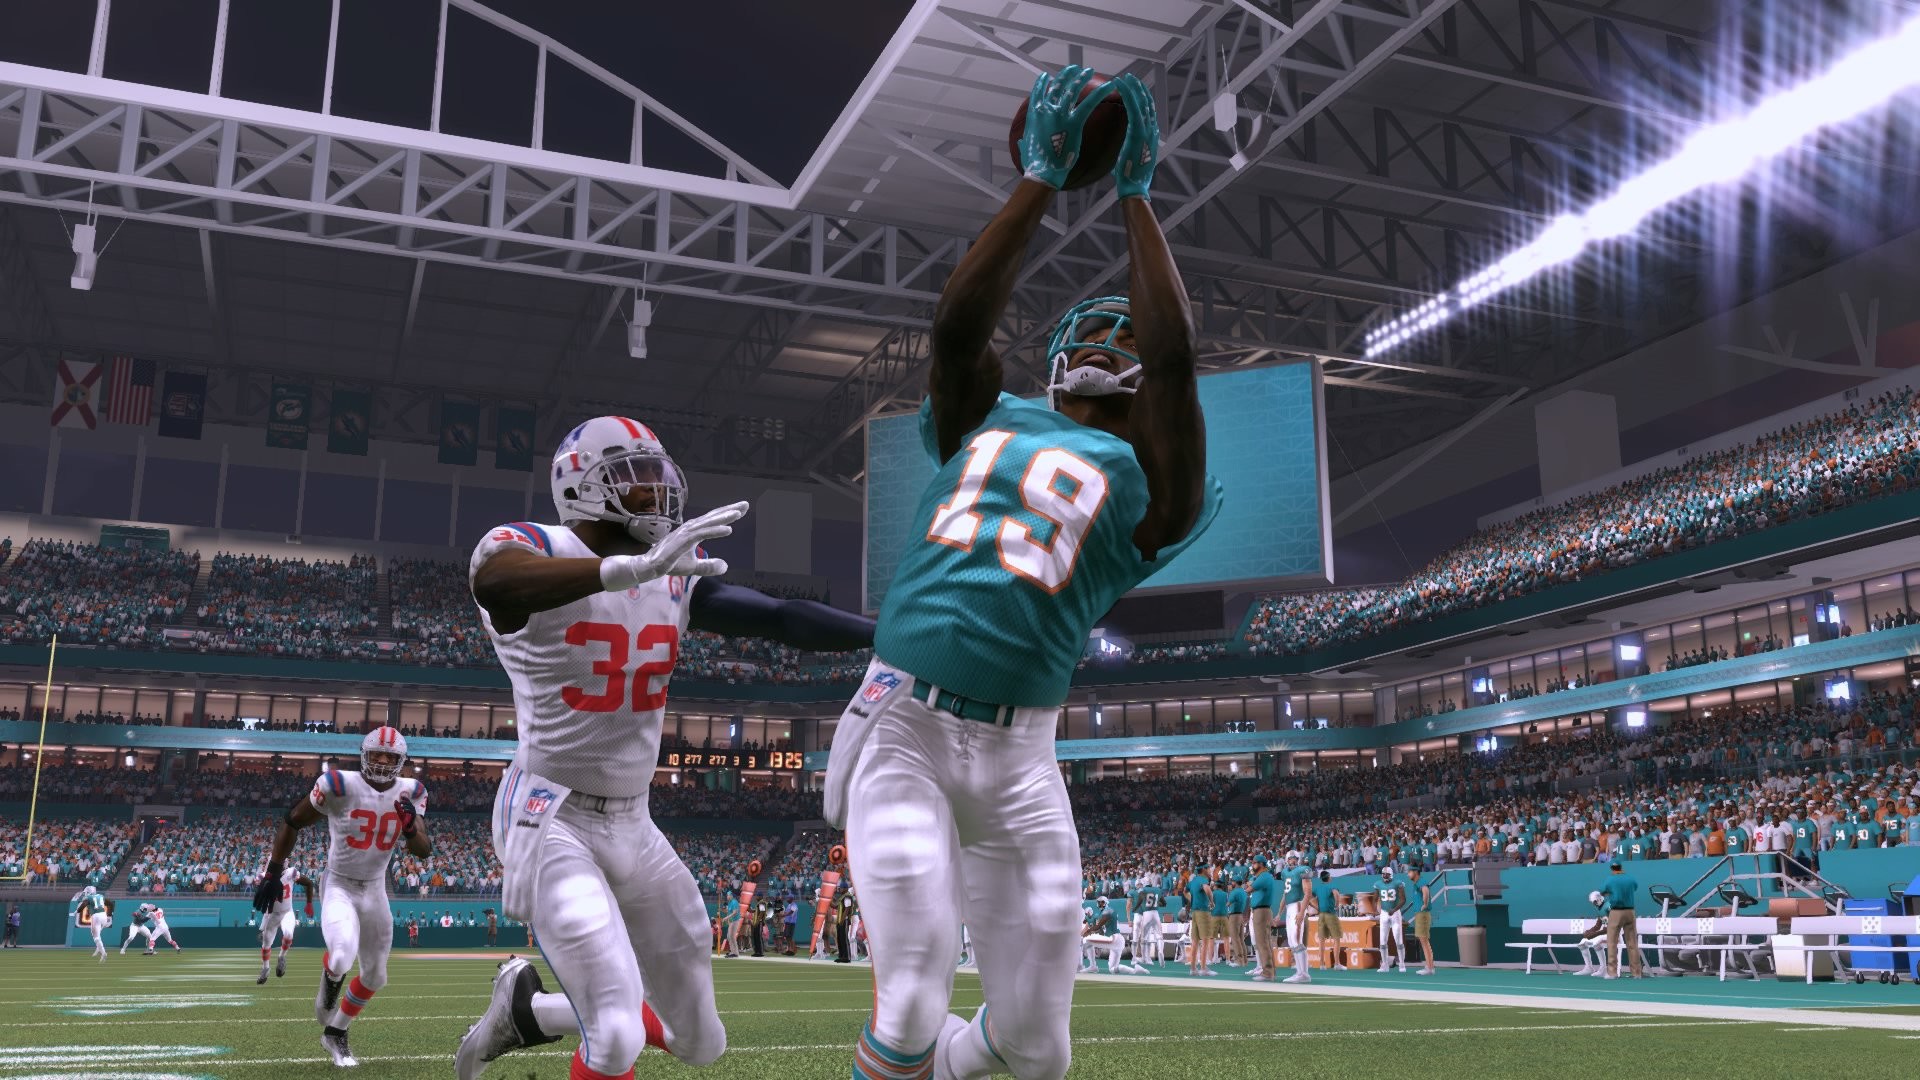 1920x1080 Jakeem Grant reigns in great catch, makes it 24-10 Miami